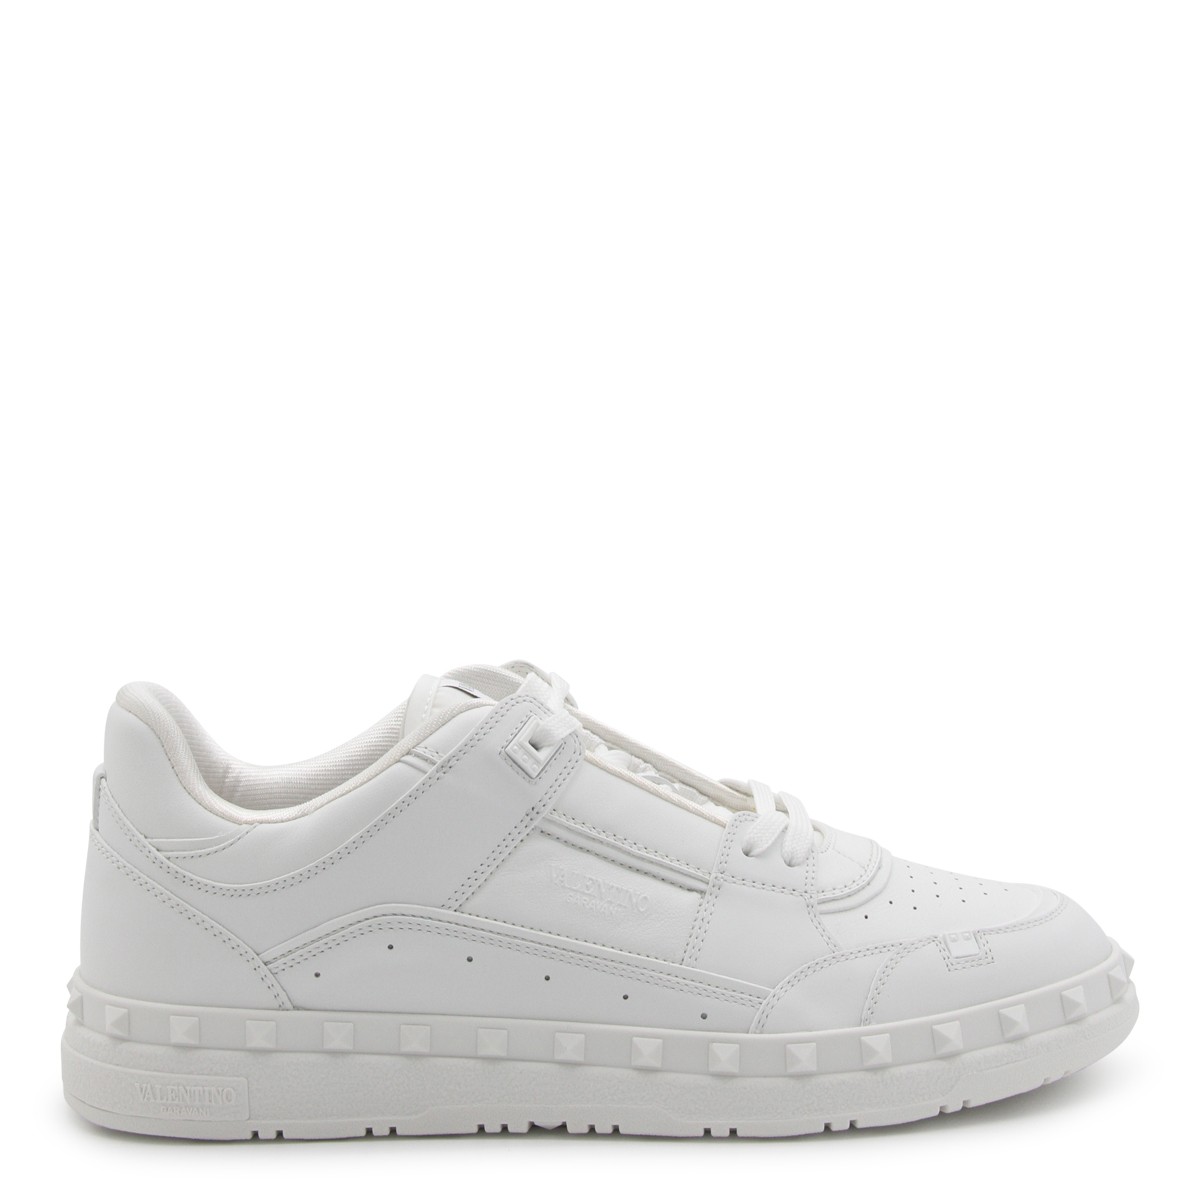 WHITE LEATHER FREEDOTS SNEAKERS